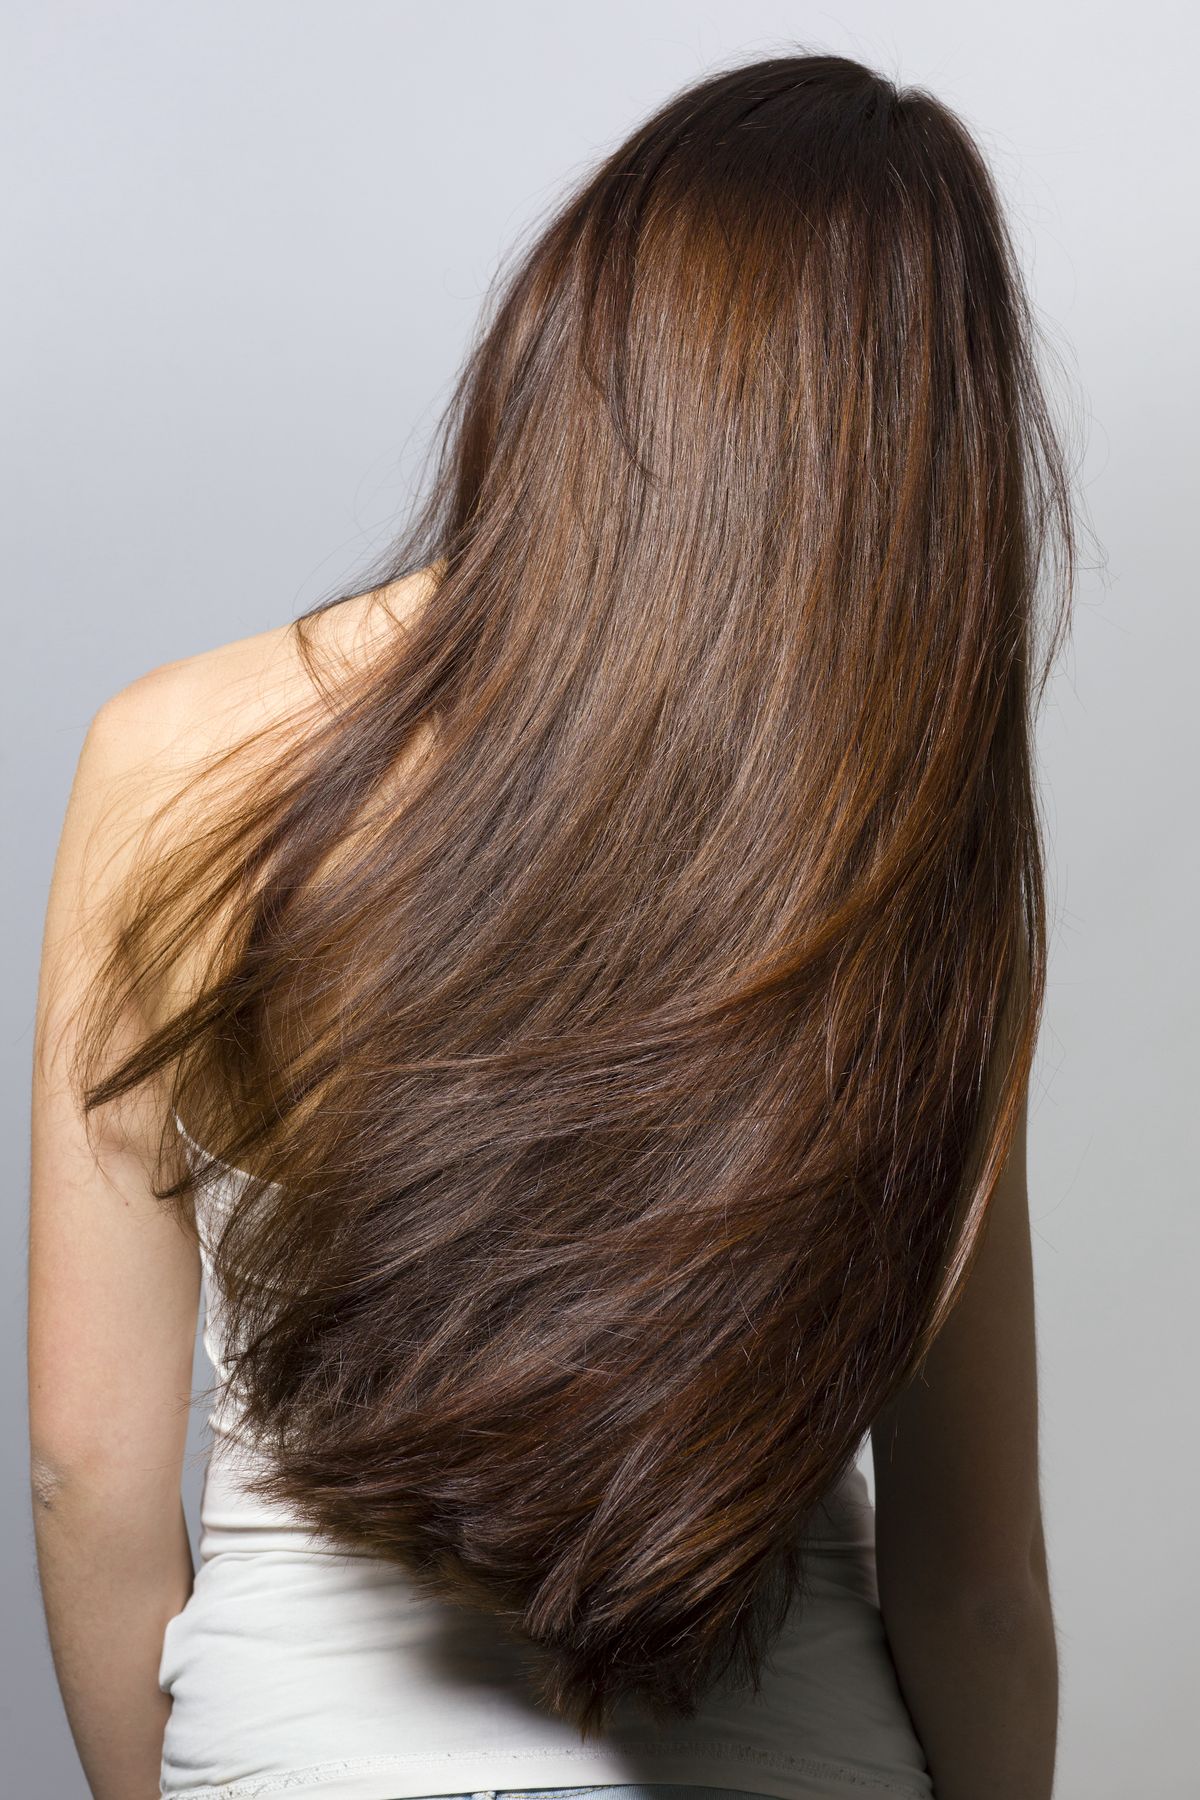 How to Get Thicker Hair Naturally, According to Experts